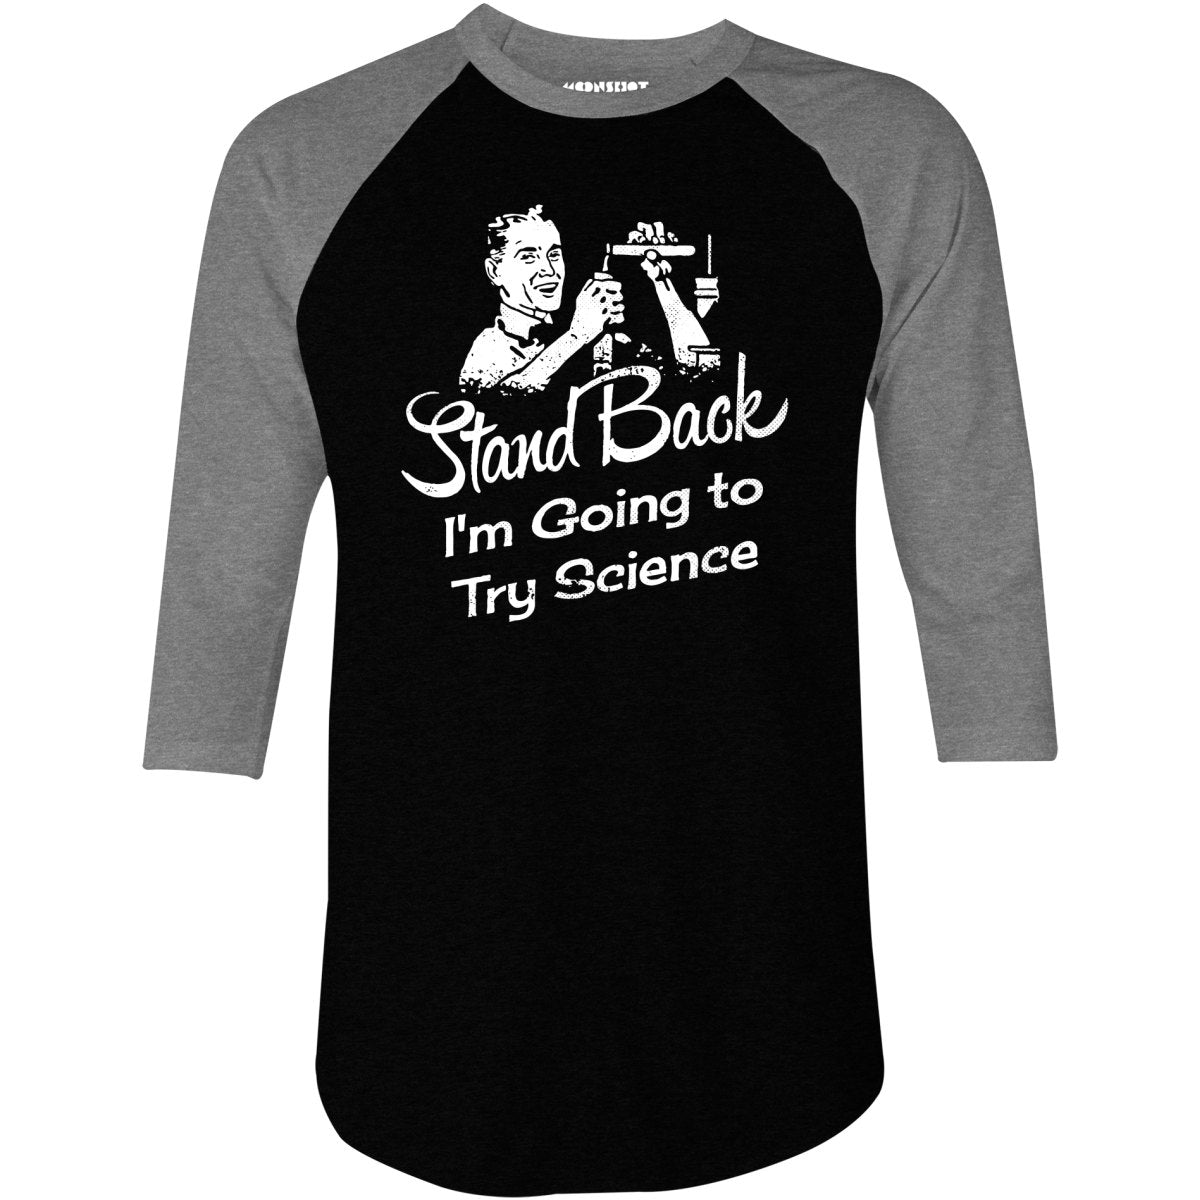 Stand Back I'm Going to Try Science - 3/4 Sleeve Raglan T-Shirt